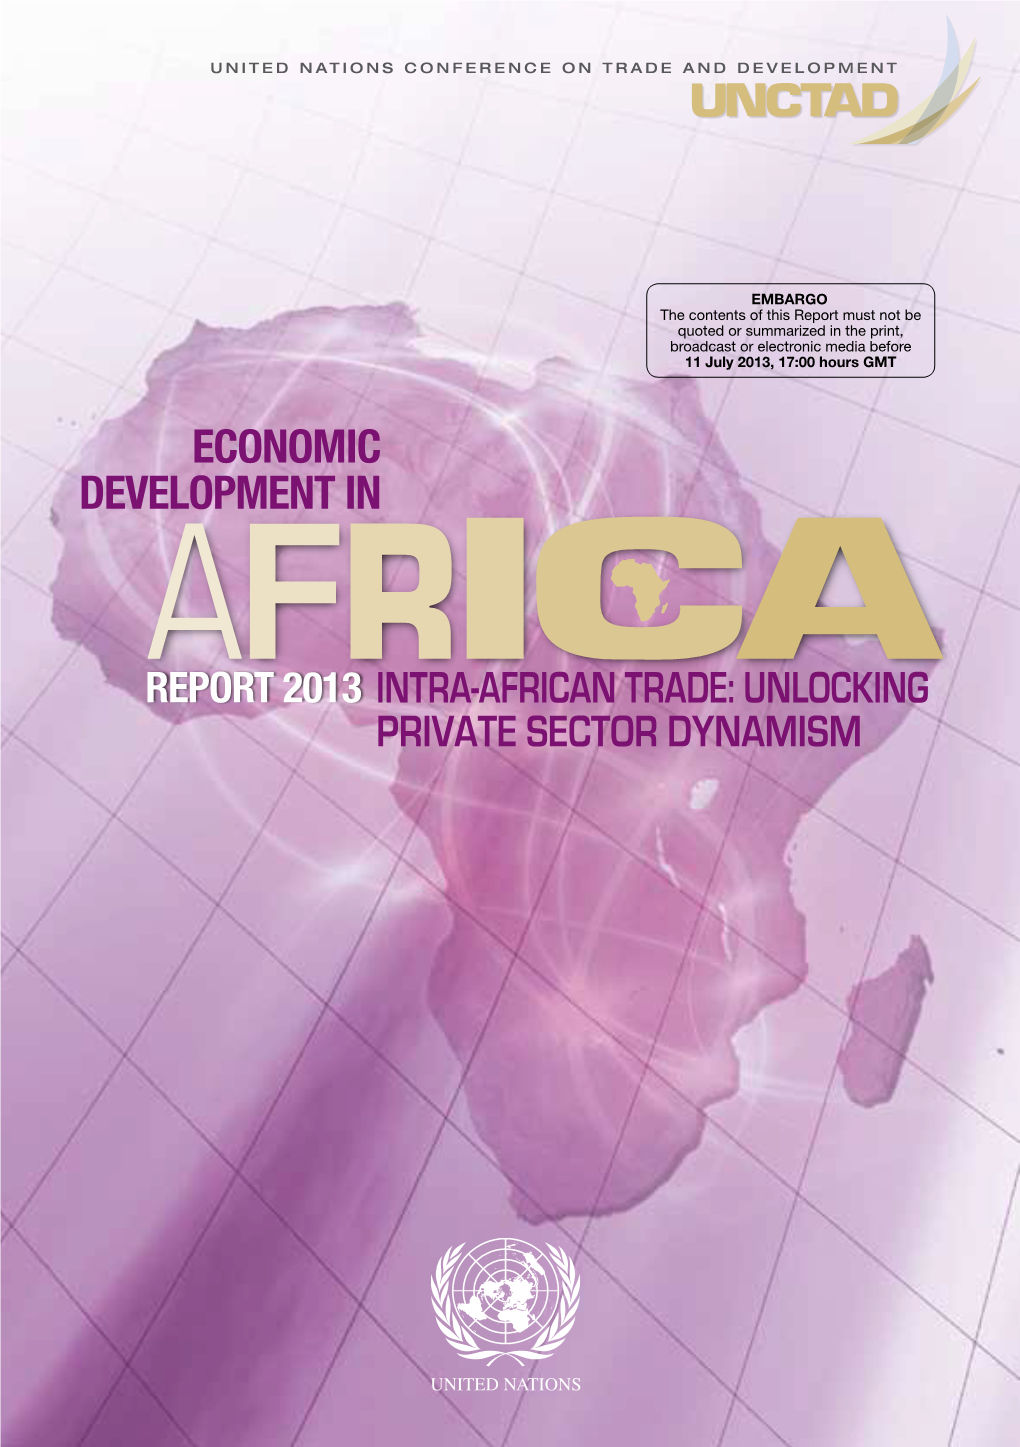 Economic Development in Africa Report 2013 Intra-African Trade: Unlocking Private Sector Dynamism